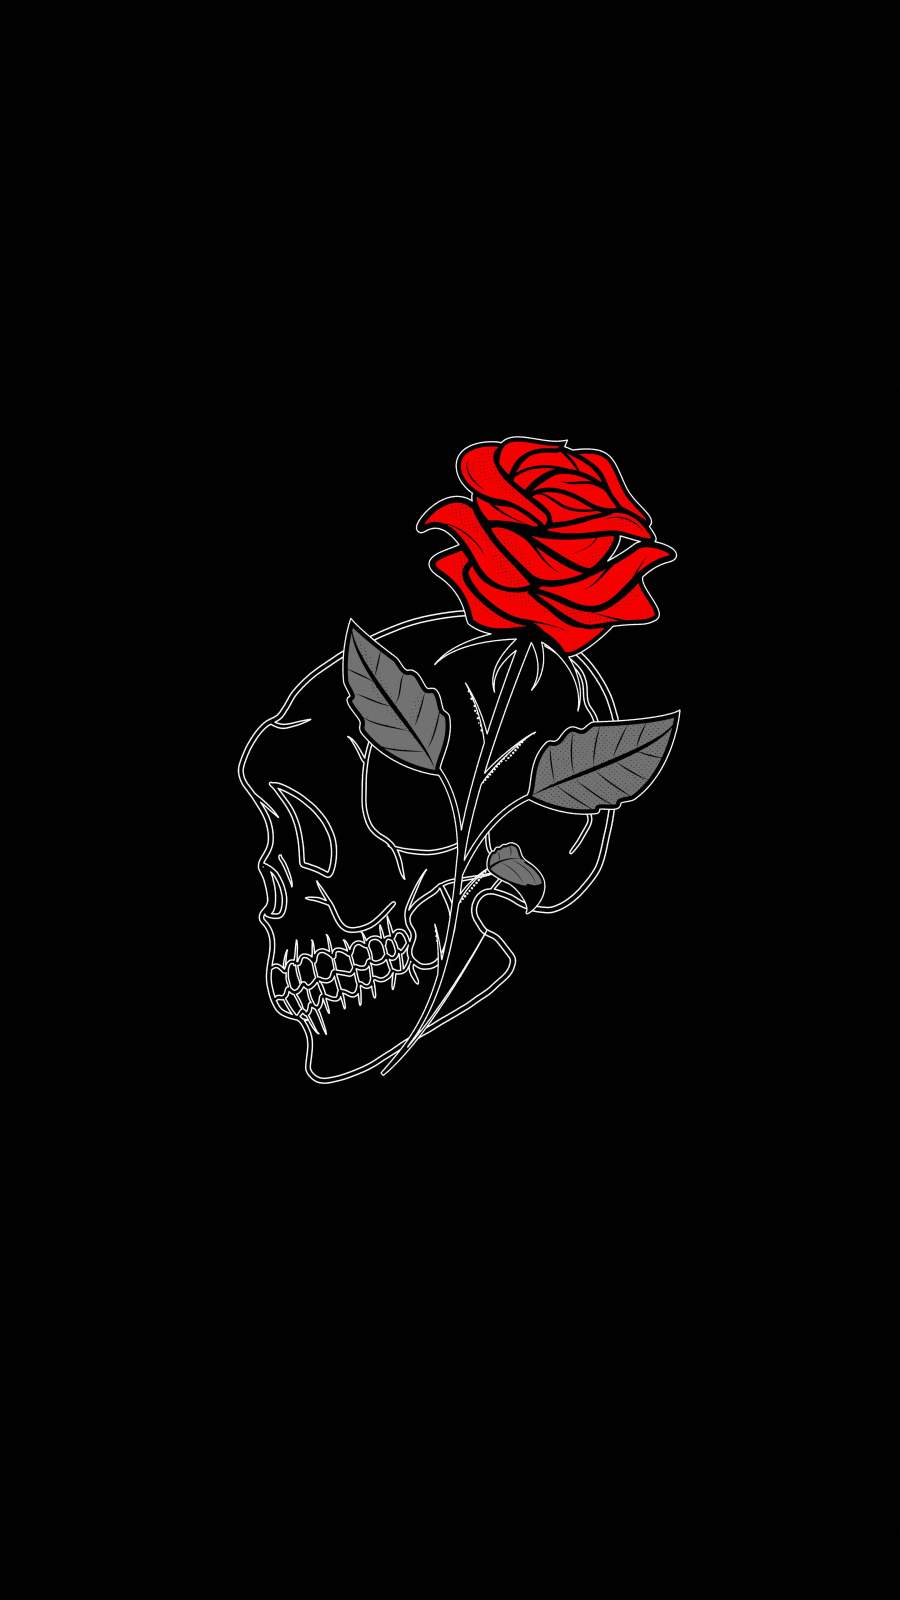 Download wallpaper 938x1668 skull flowers symbols art iphone 876s6  for parallax hd background